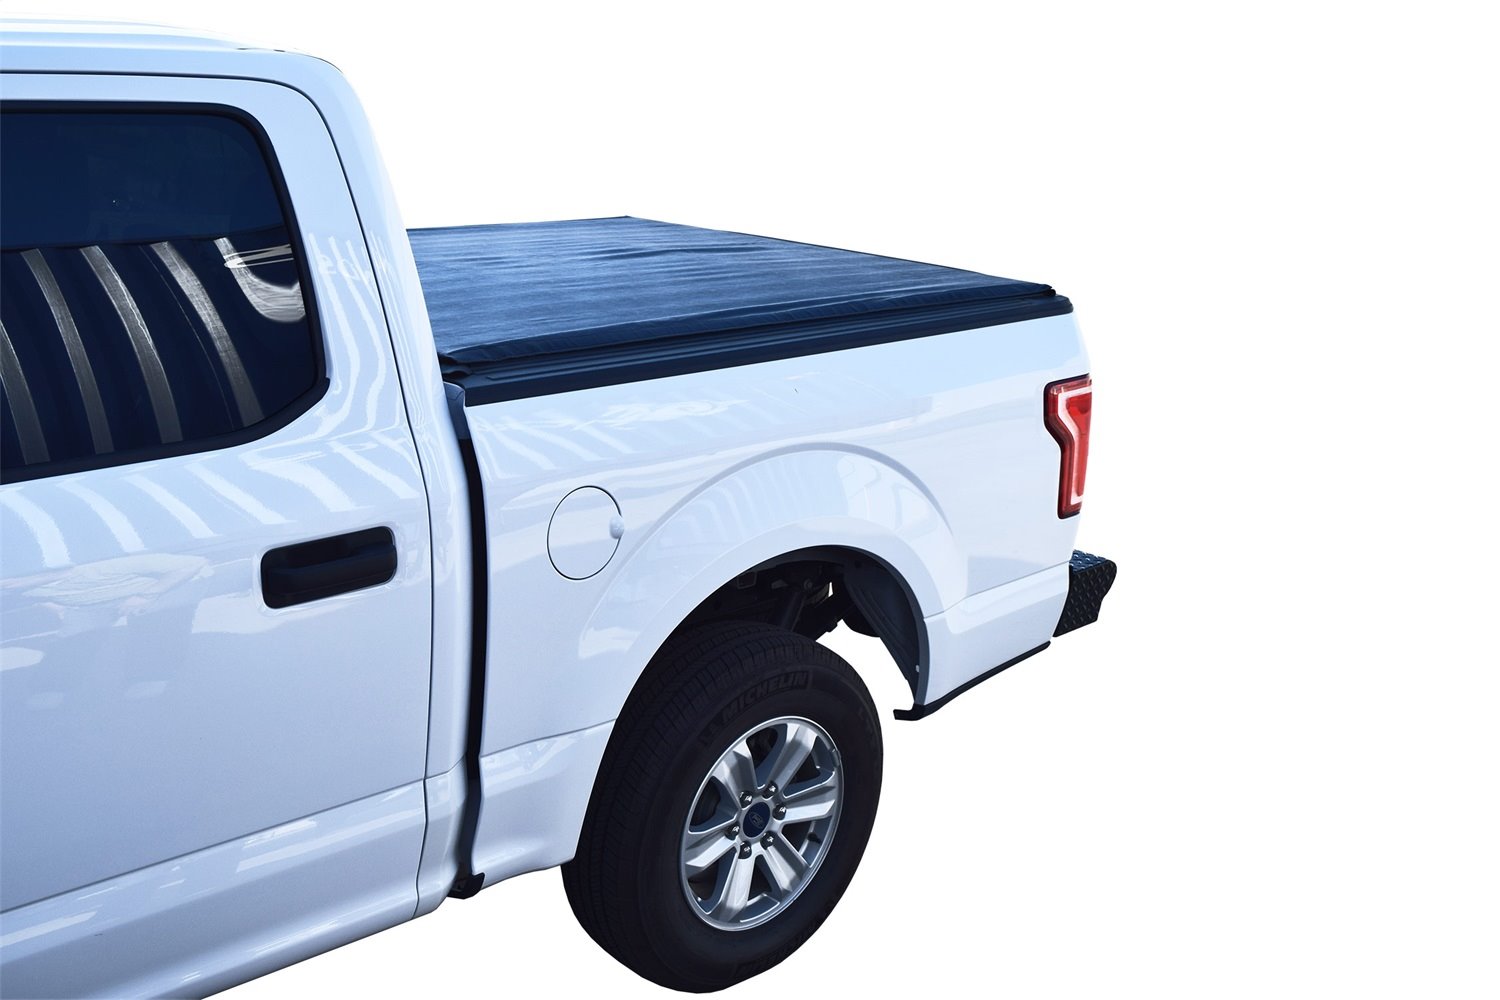 These Steelcraft Roll-up Tonneau Covers are designed to